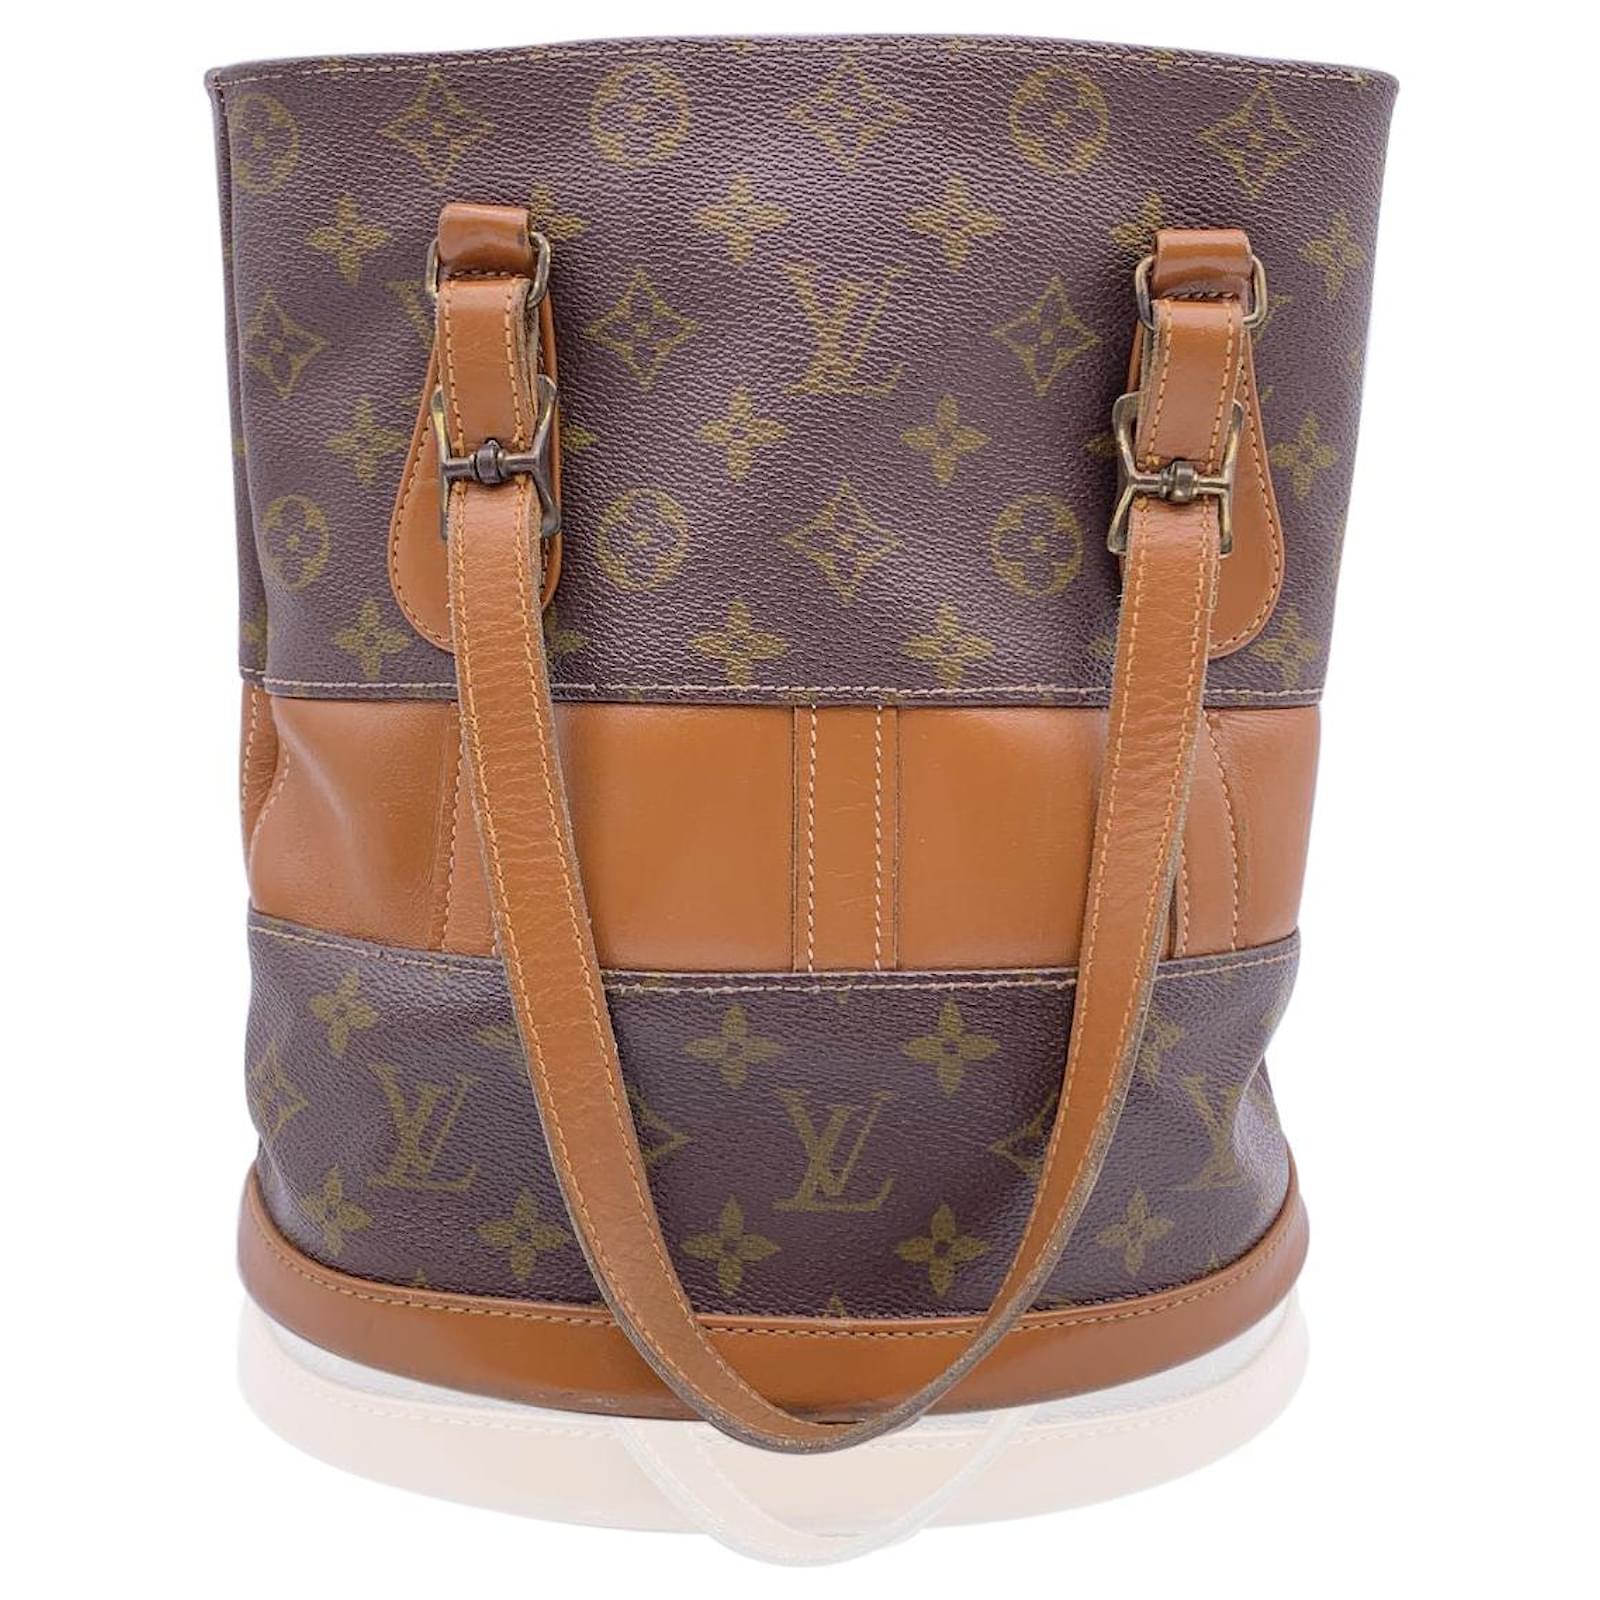 1970s LOUIS VUITTON Monogram Bucket Bag - Under Special License to the  French Co